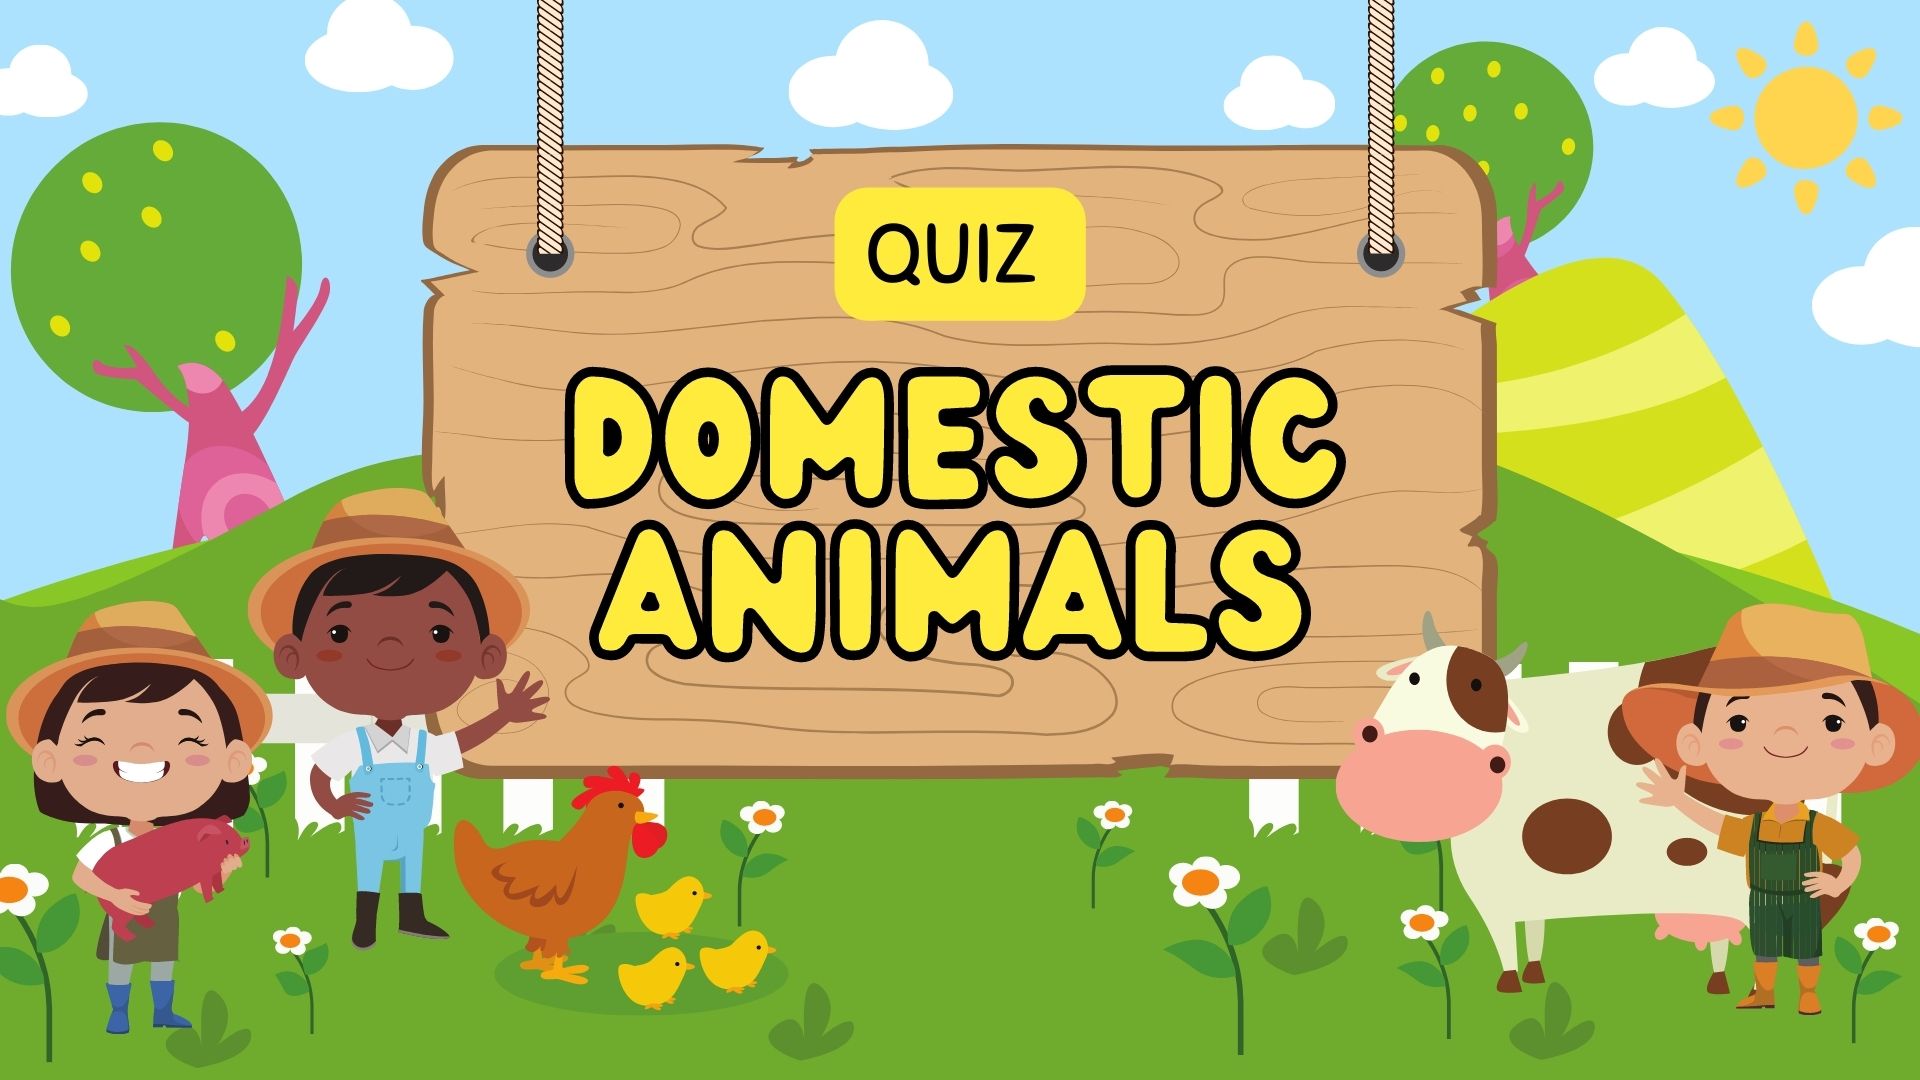 gross domestic product - Year 4 - Quizizz